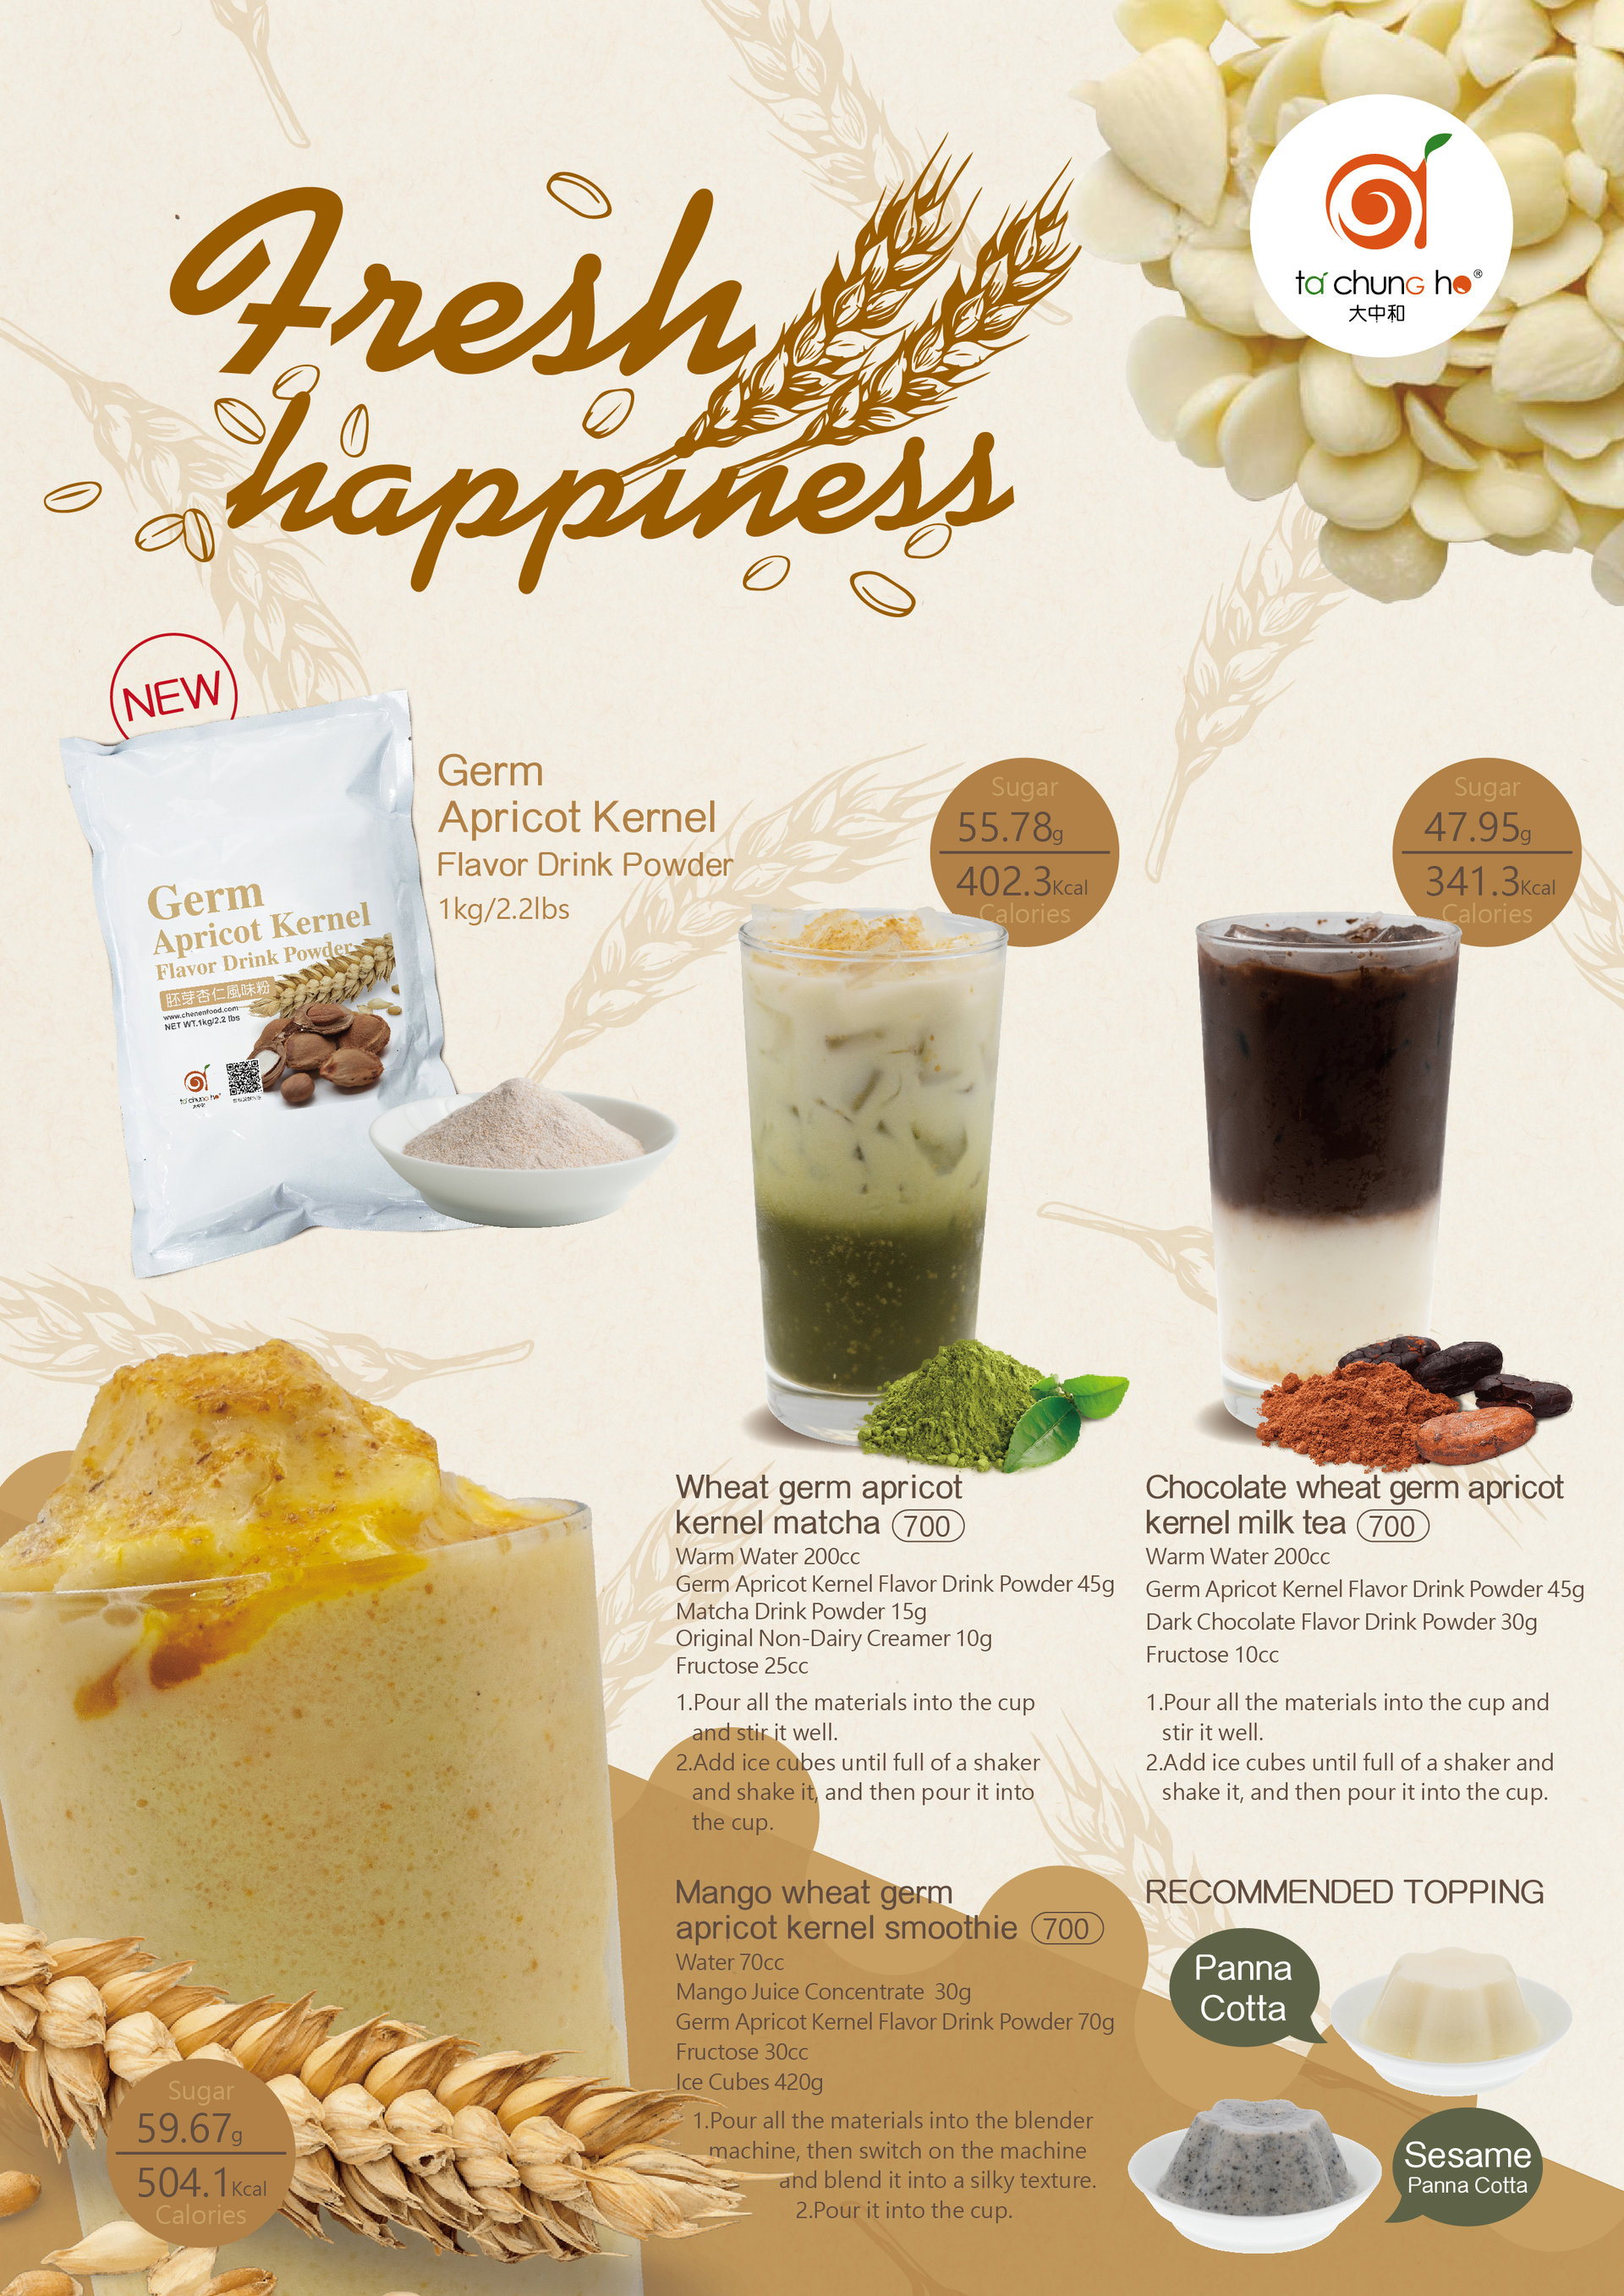 【New Product launch】Fresh happiness